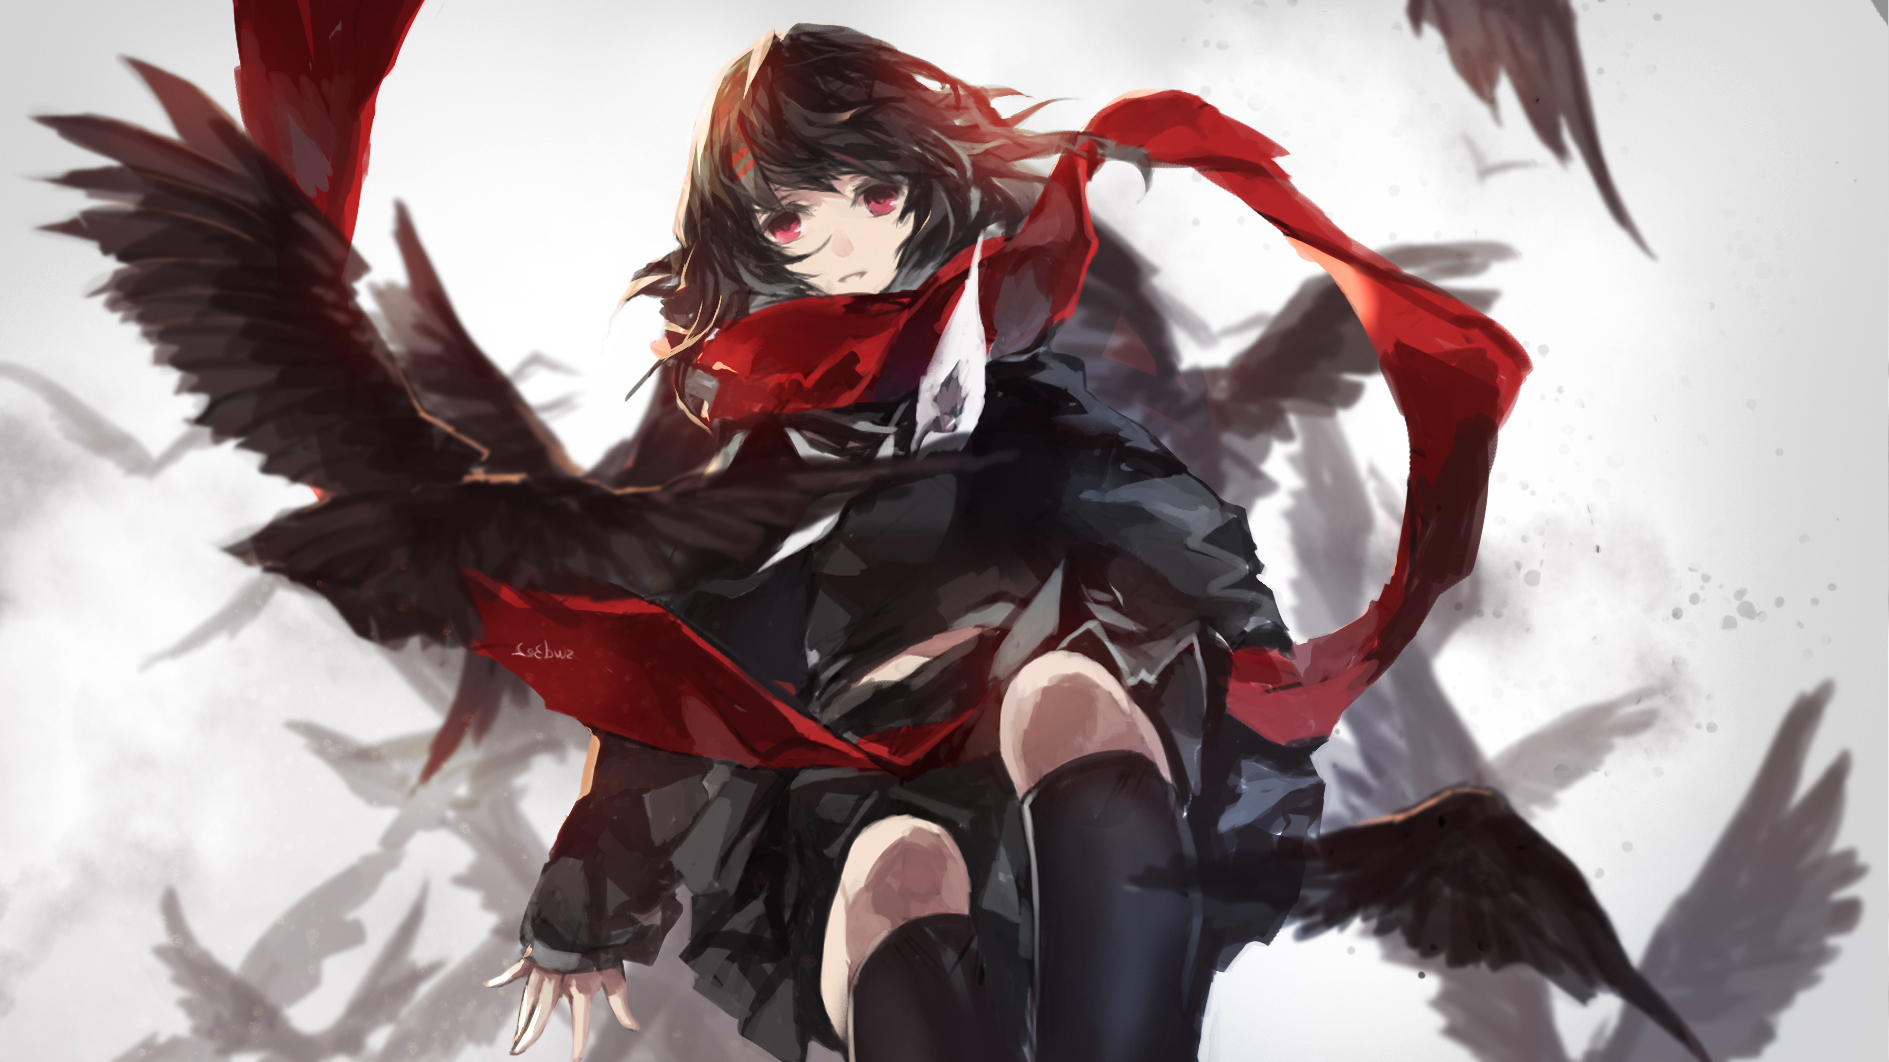 eyes with black hair Anime red girl and vampire